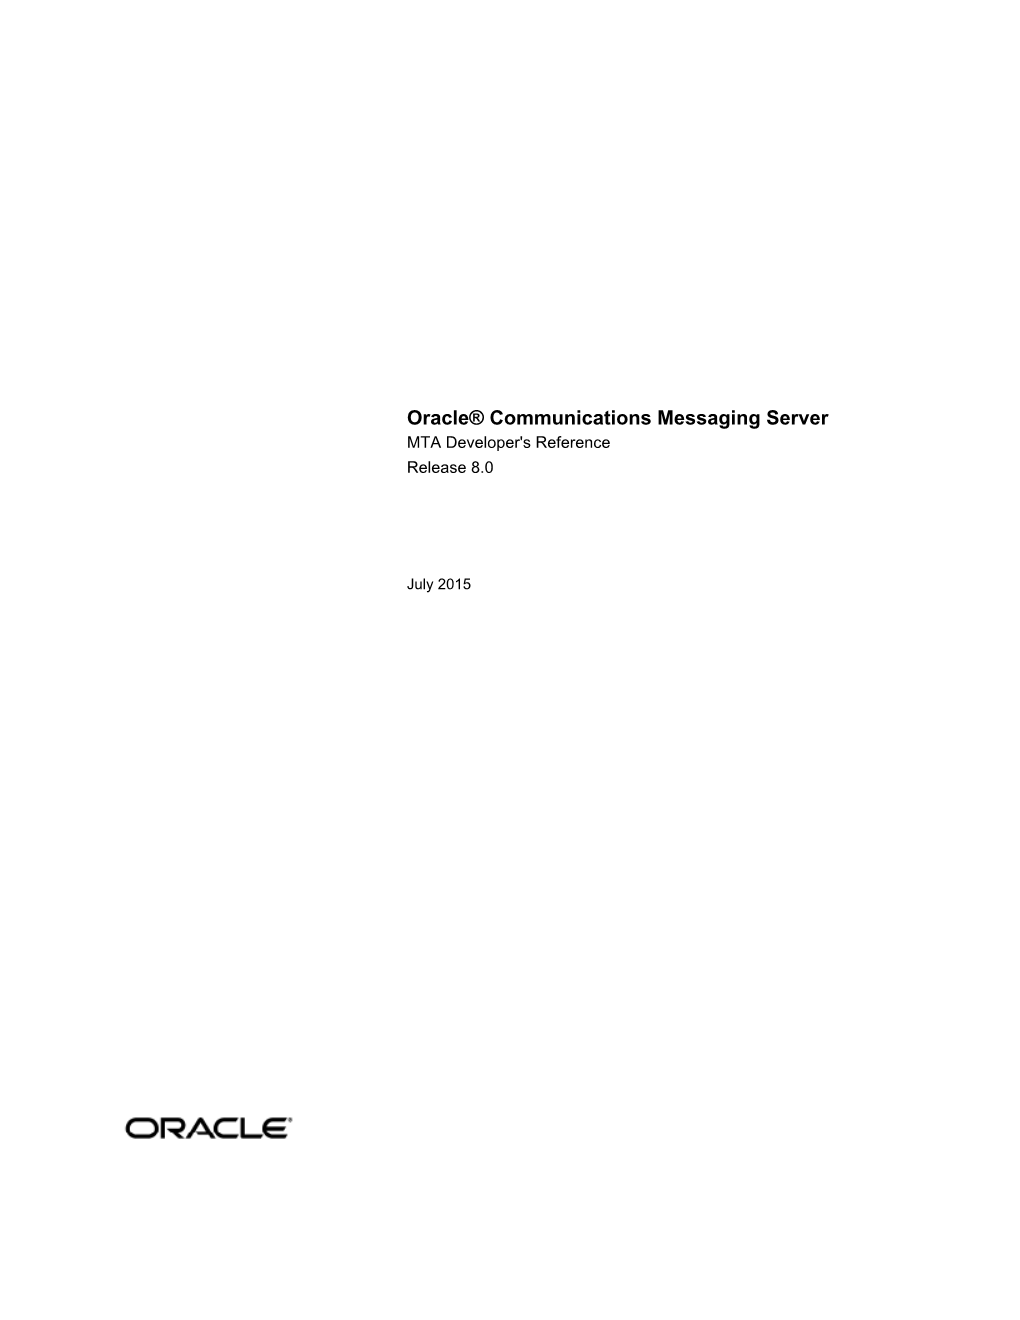 Oracle Communications Messaging Server MTA Developer's Reference, Release 8.0